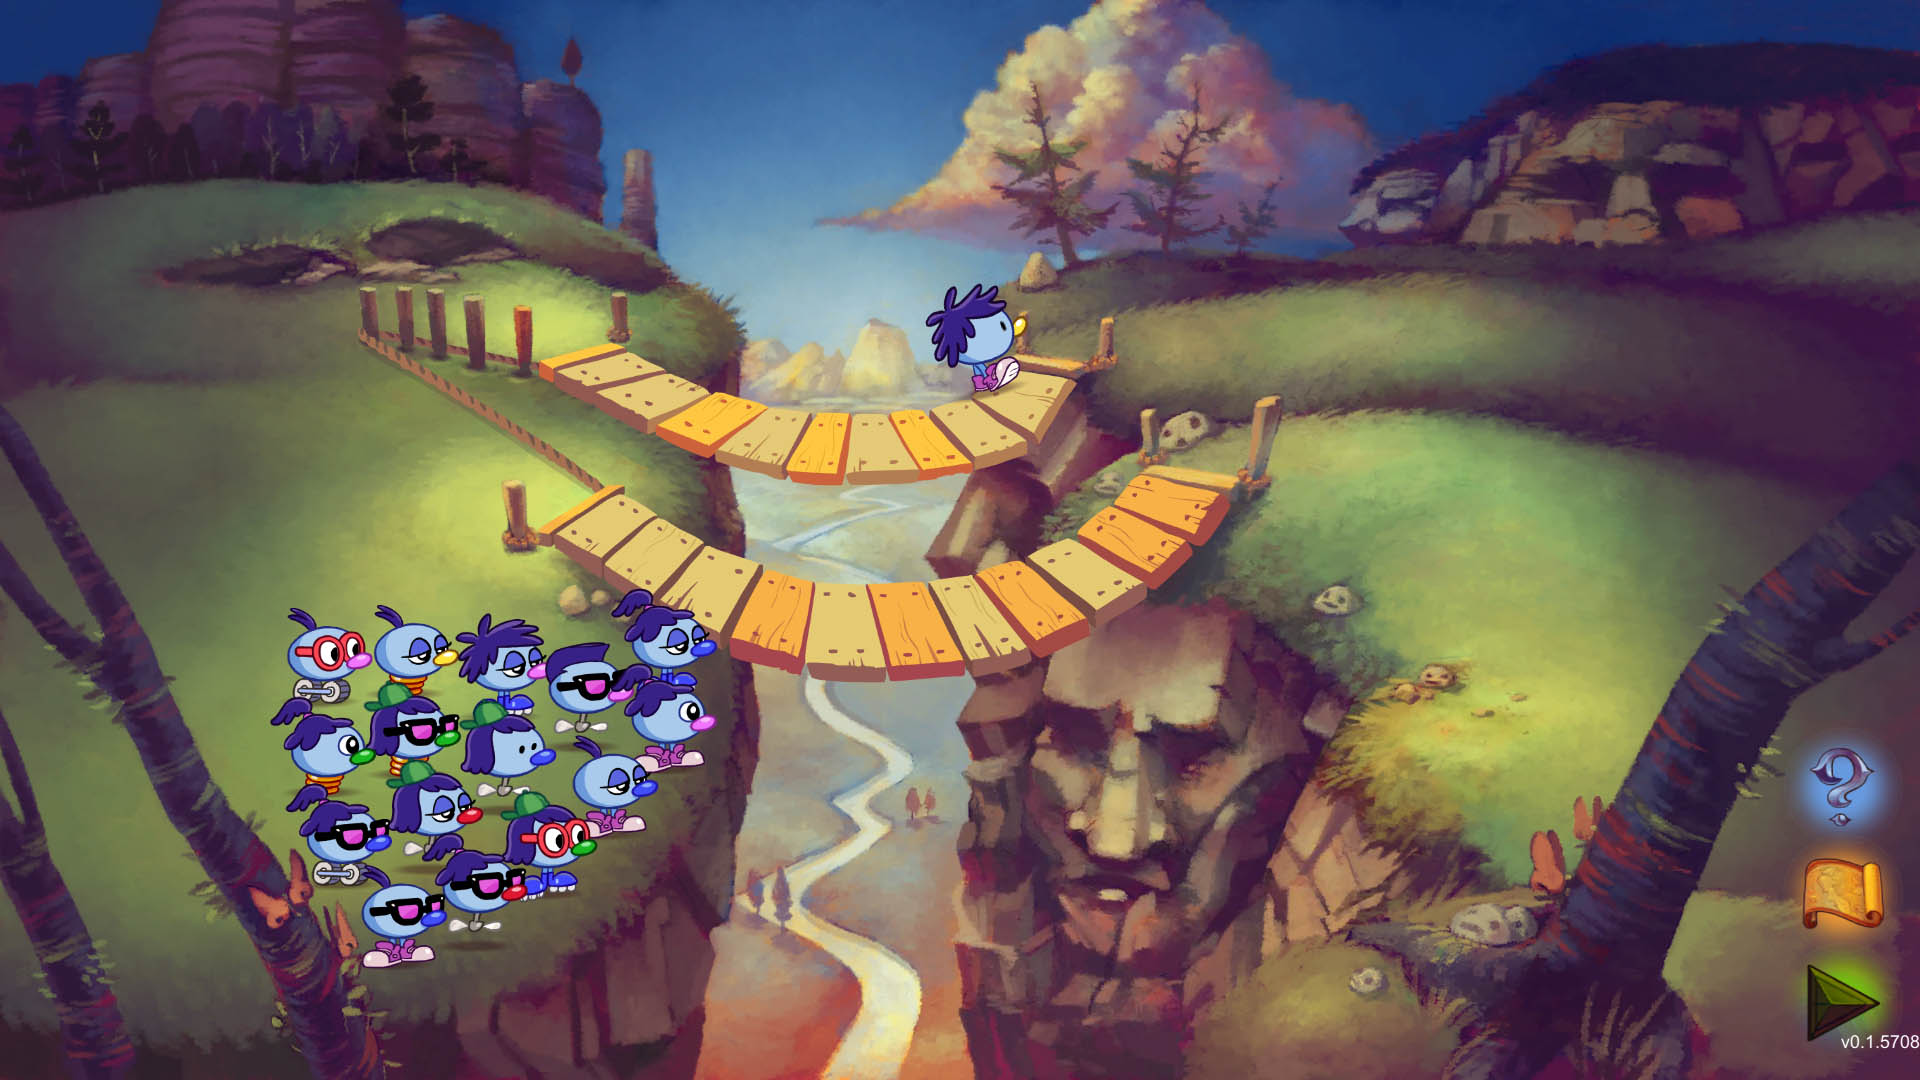 zoombinis game torrent pirate bay